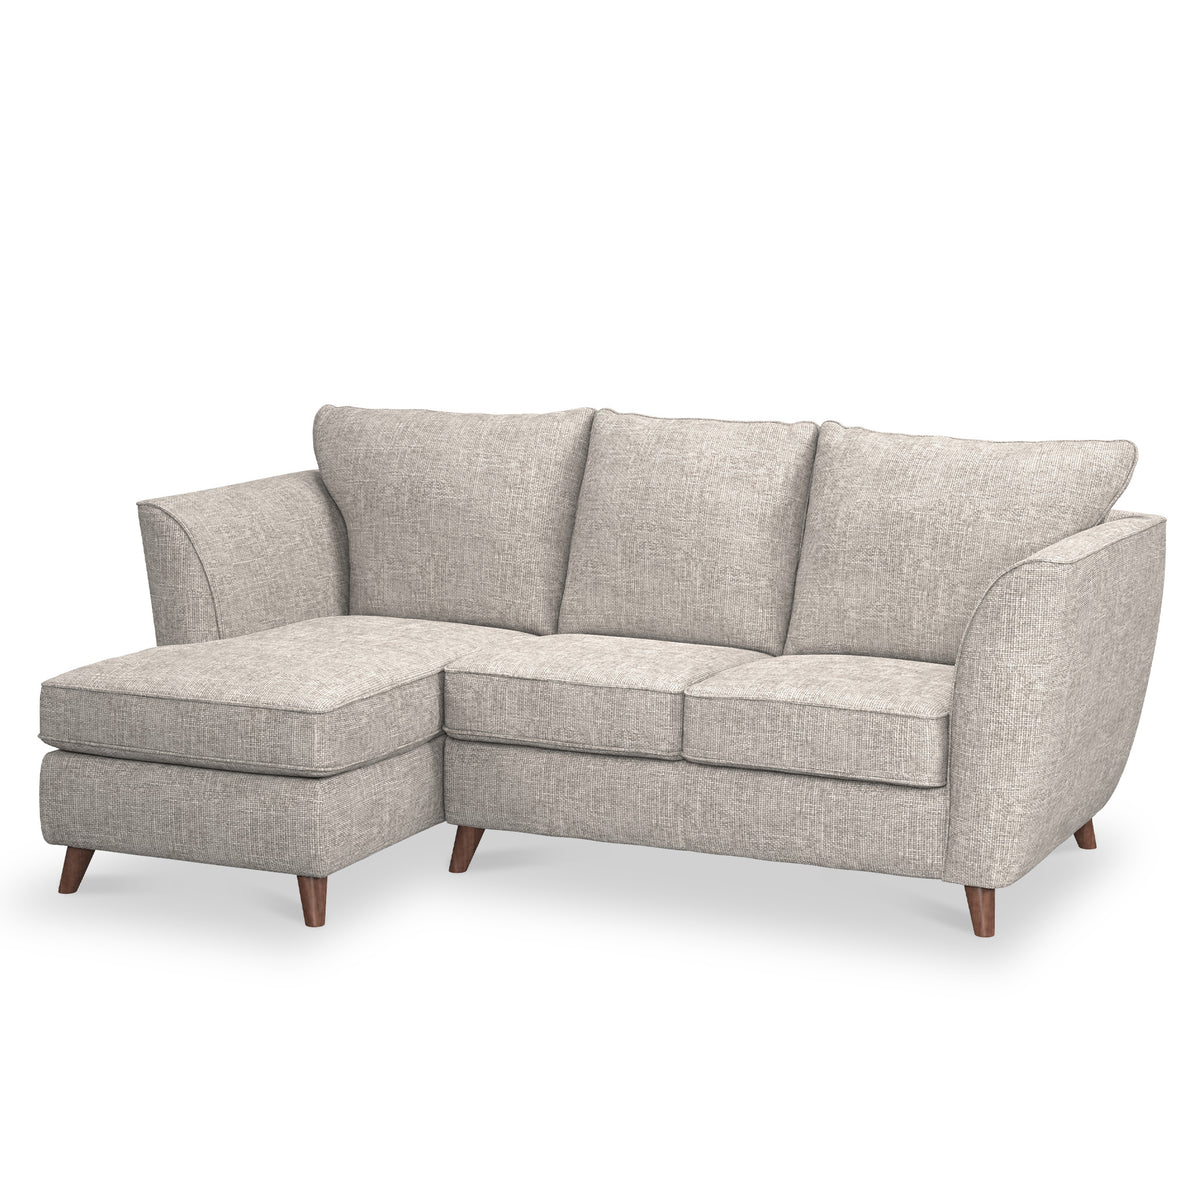 Tamsin Stone Left Hand Chaise Sofa from Roseland Furniture